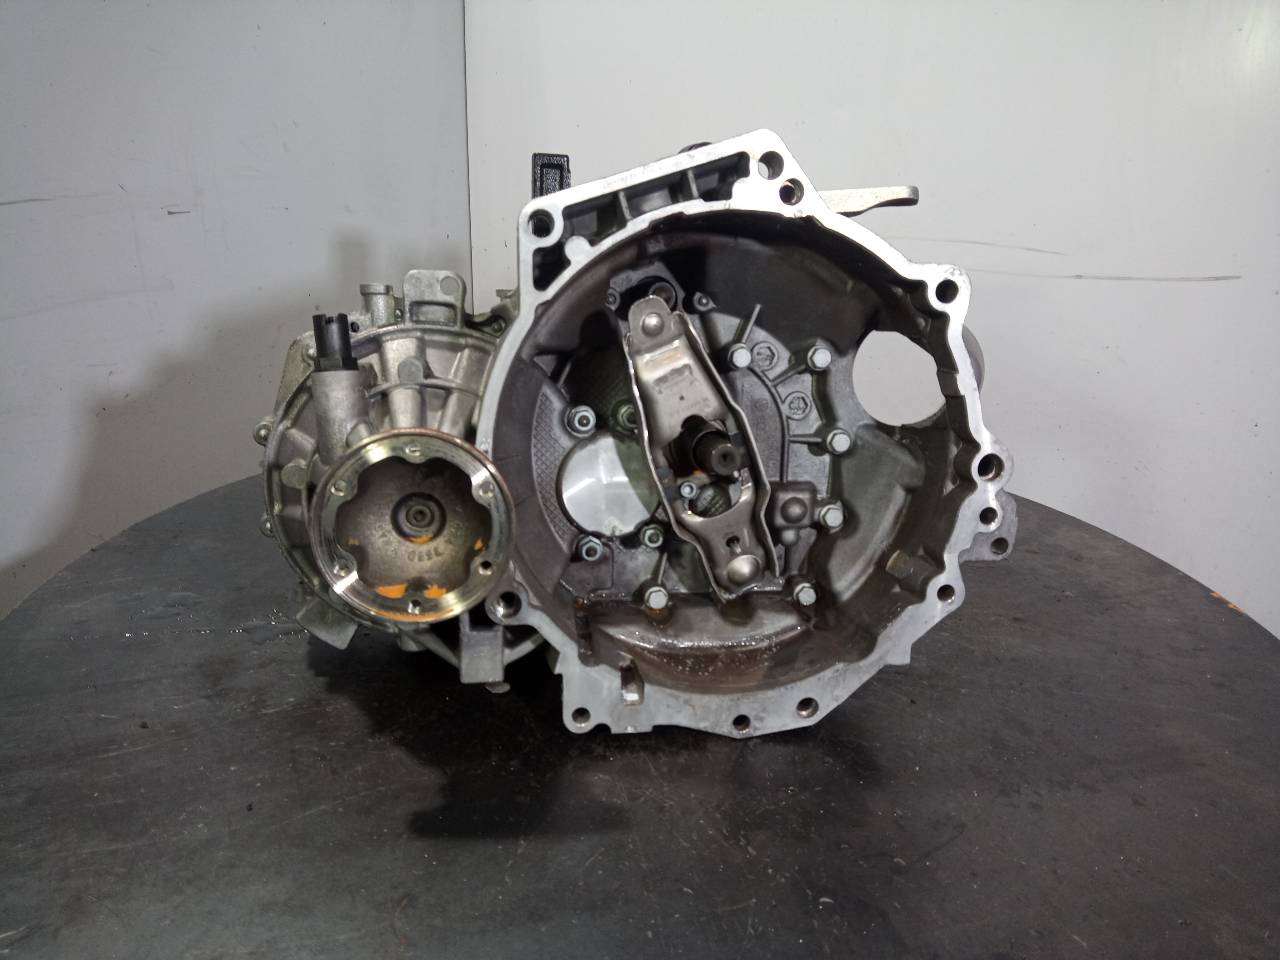 SEAT Toledo 4 generation (2012-2020) Gearbox MZL, M1-A1-31 21800121